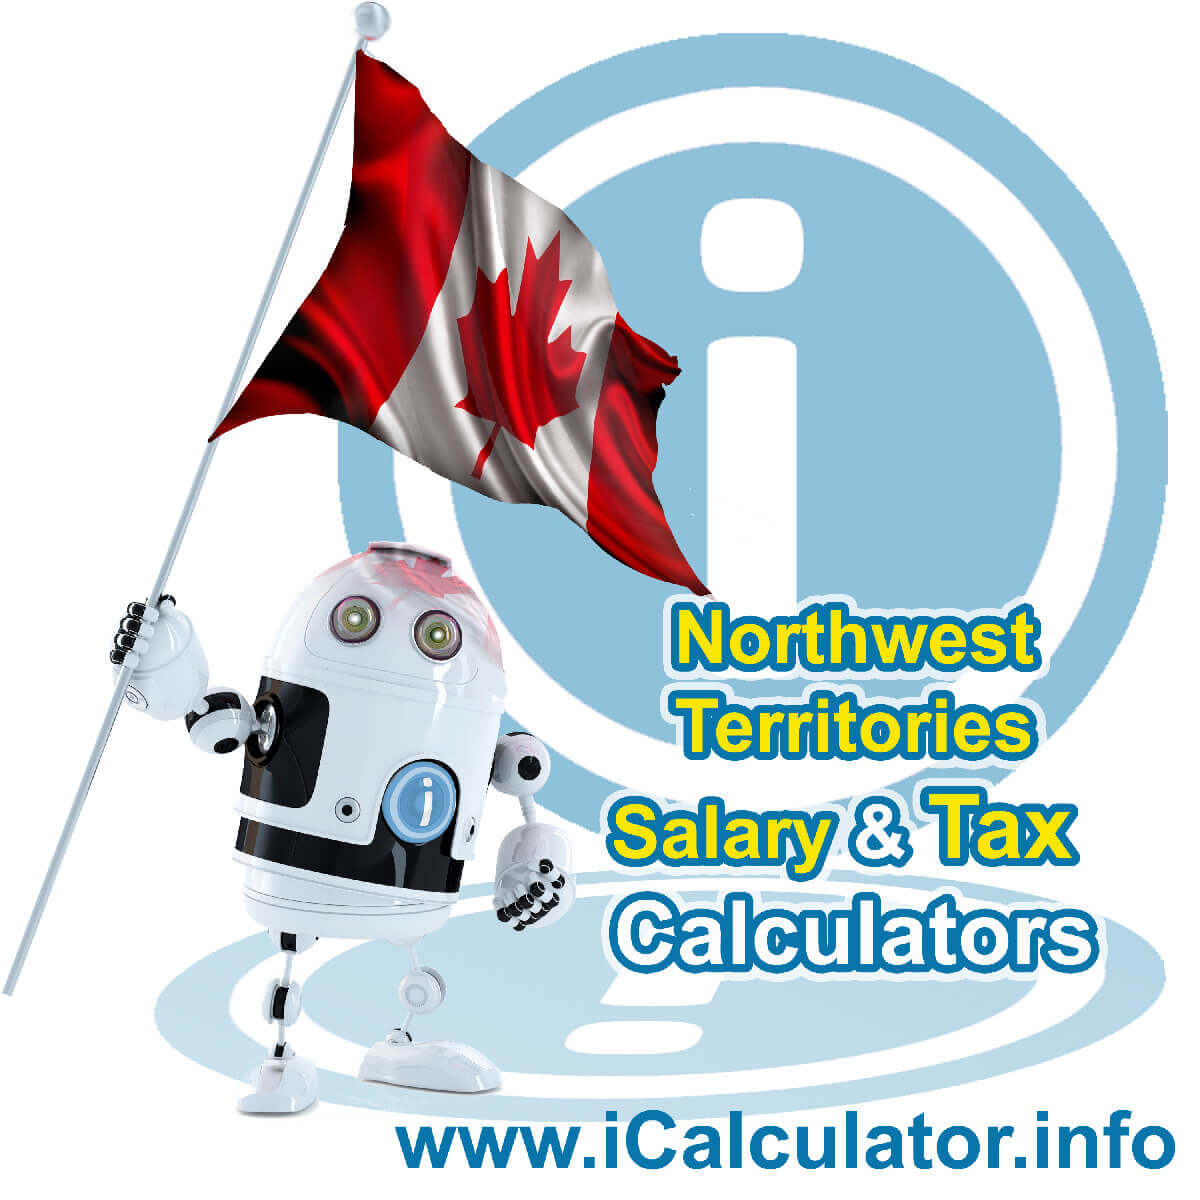 Northwest Territories 2023 Salary Comparison Calculator. This image shows the Northwest Territories flag and information relating to the tax formula used in the Northwest Territories 2023 Salary Comparison Calculator